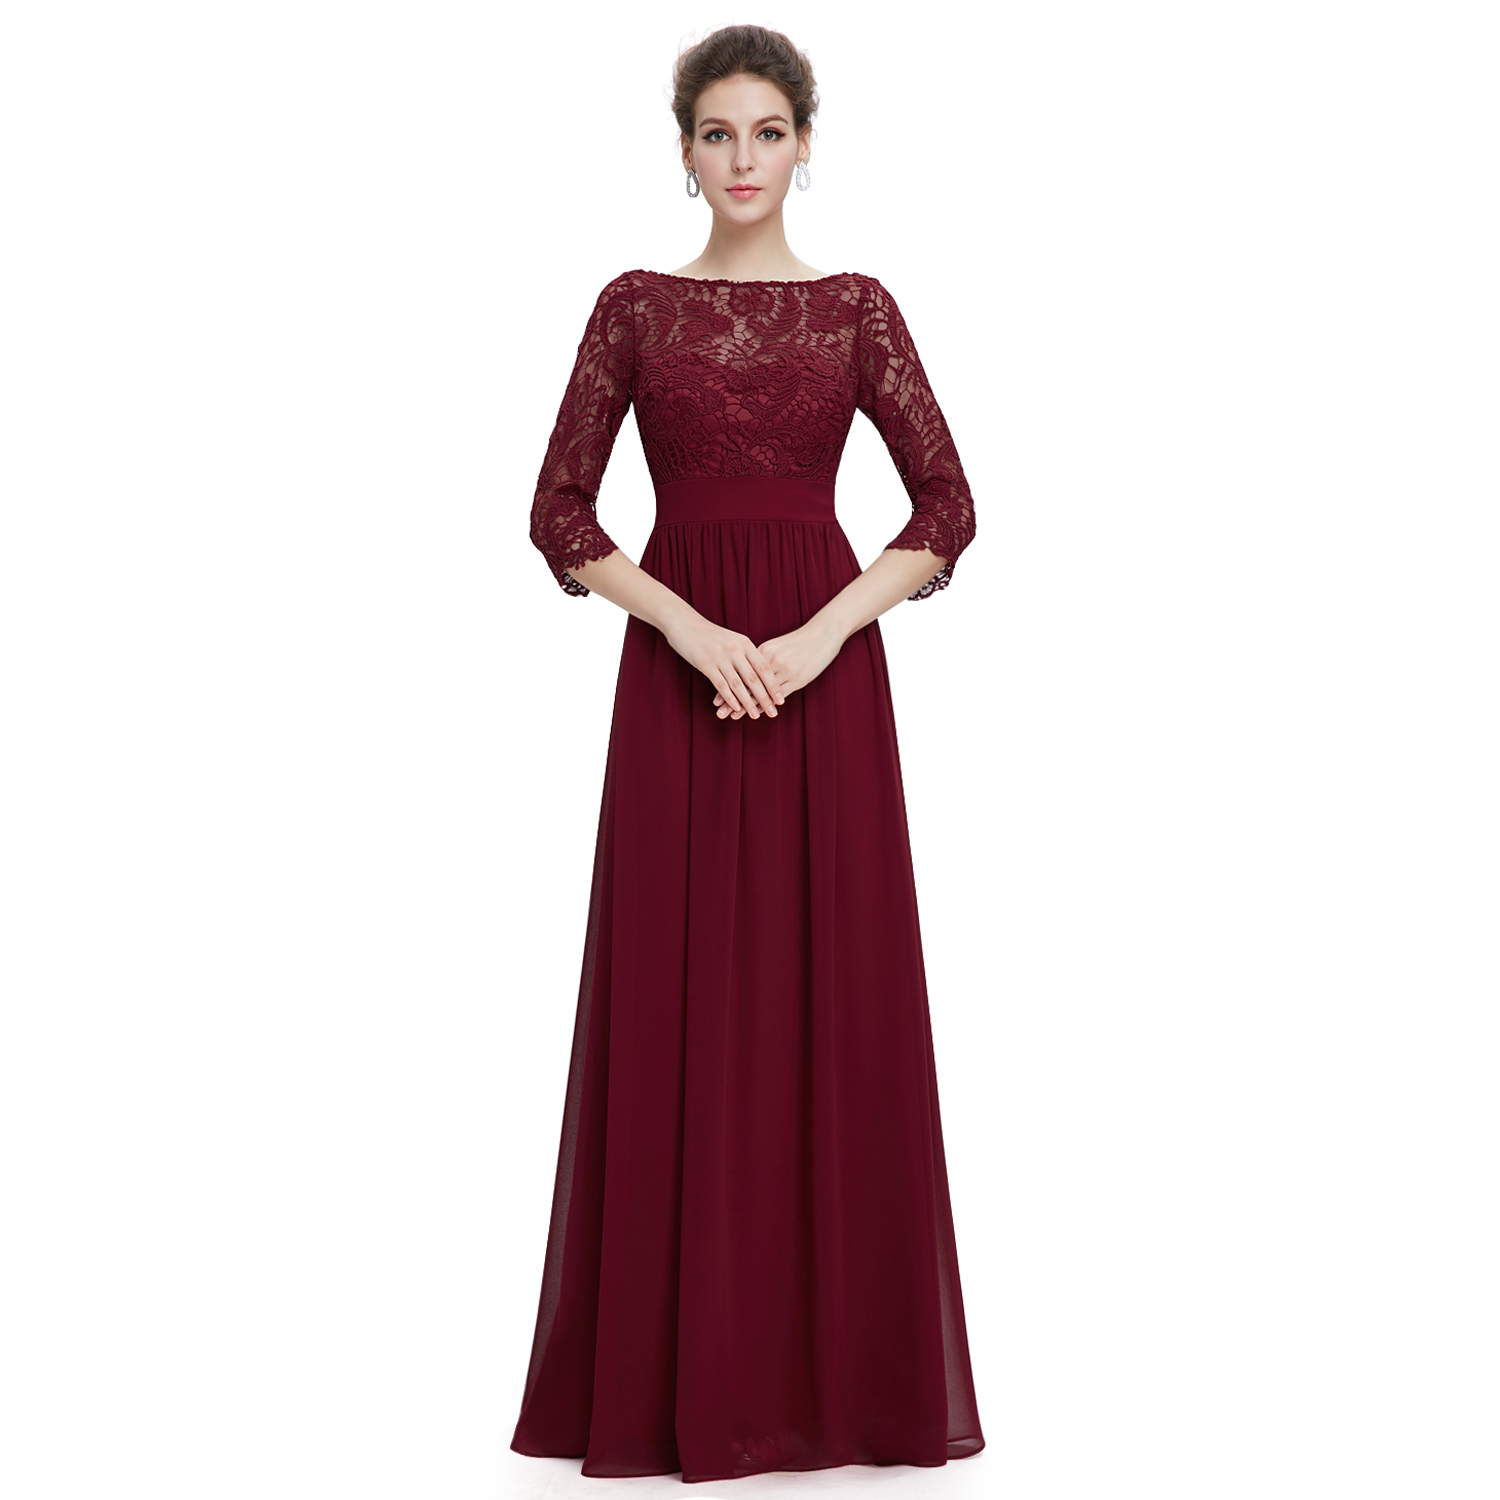 US Women's Bridesmaid Gowns Lace Long Evening Formal Party Prom Dress ...